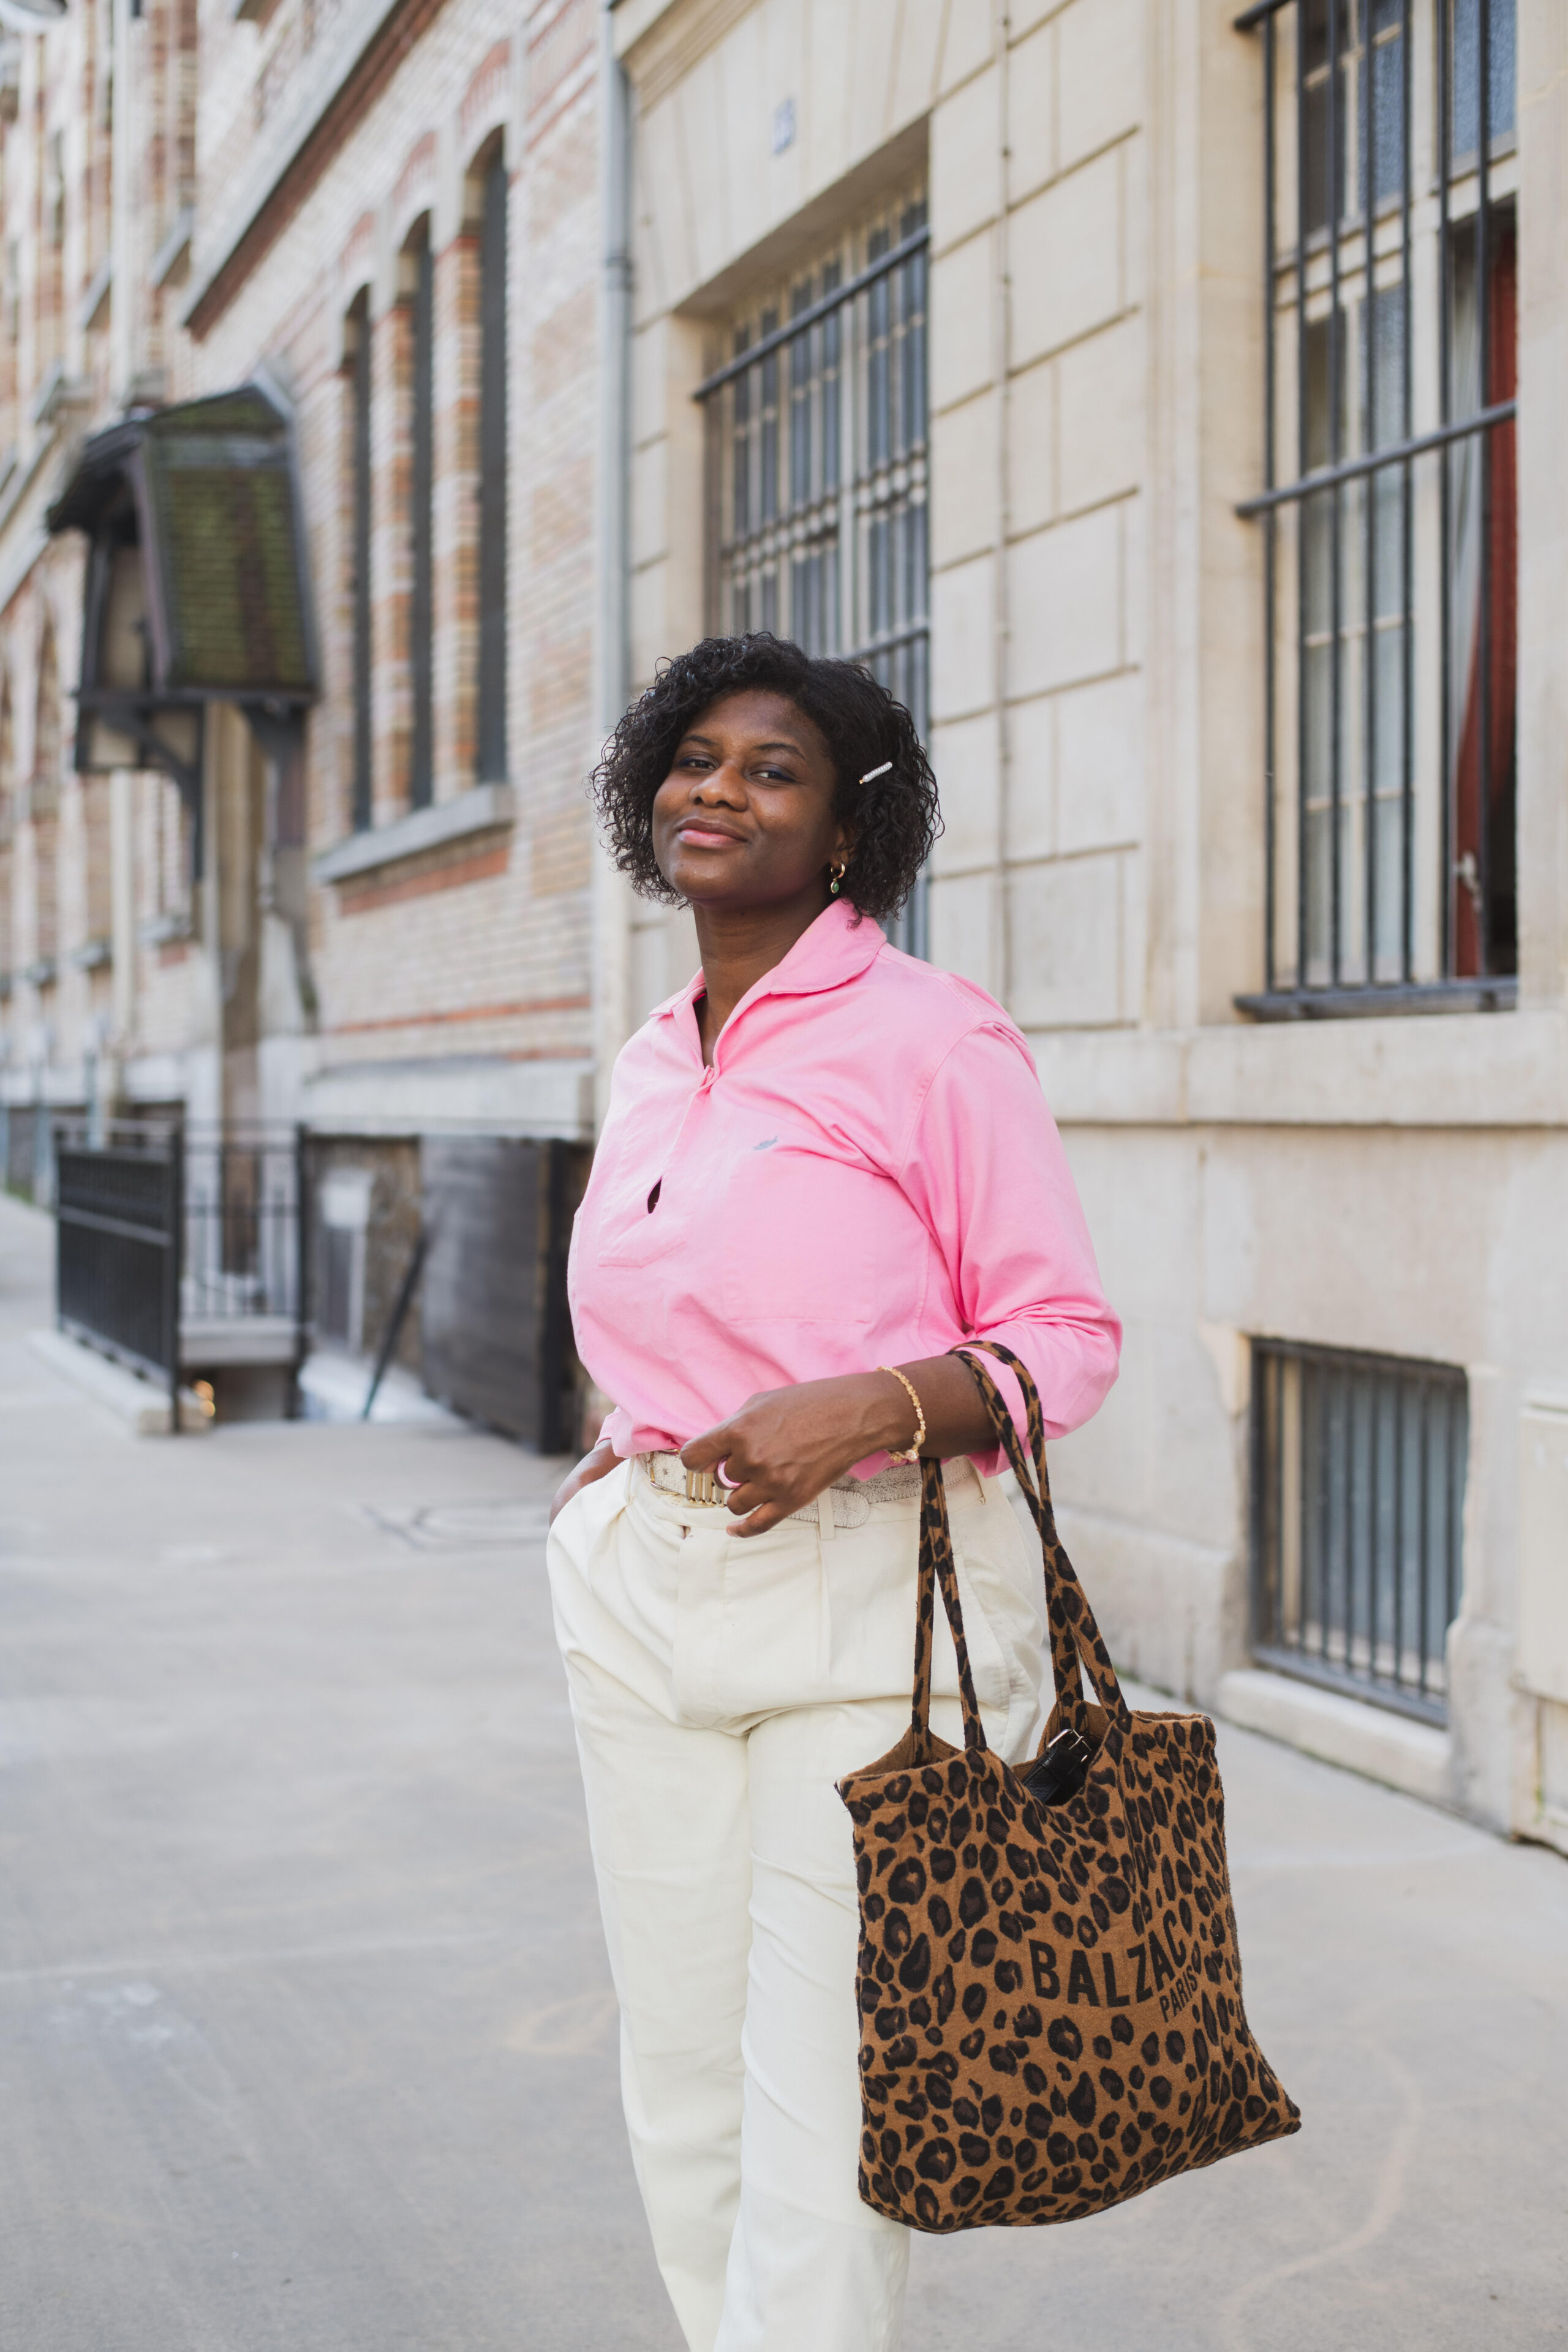 A woman in a pink shirt and white pants holding a leopard print bag stands confidently on a city street.